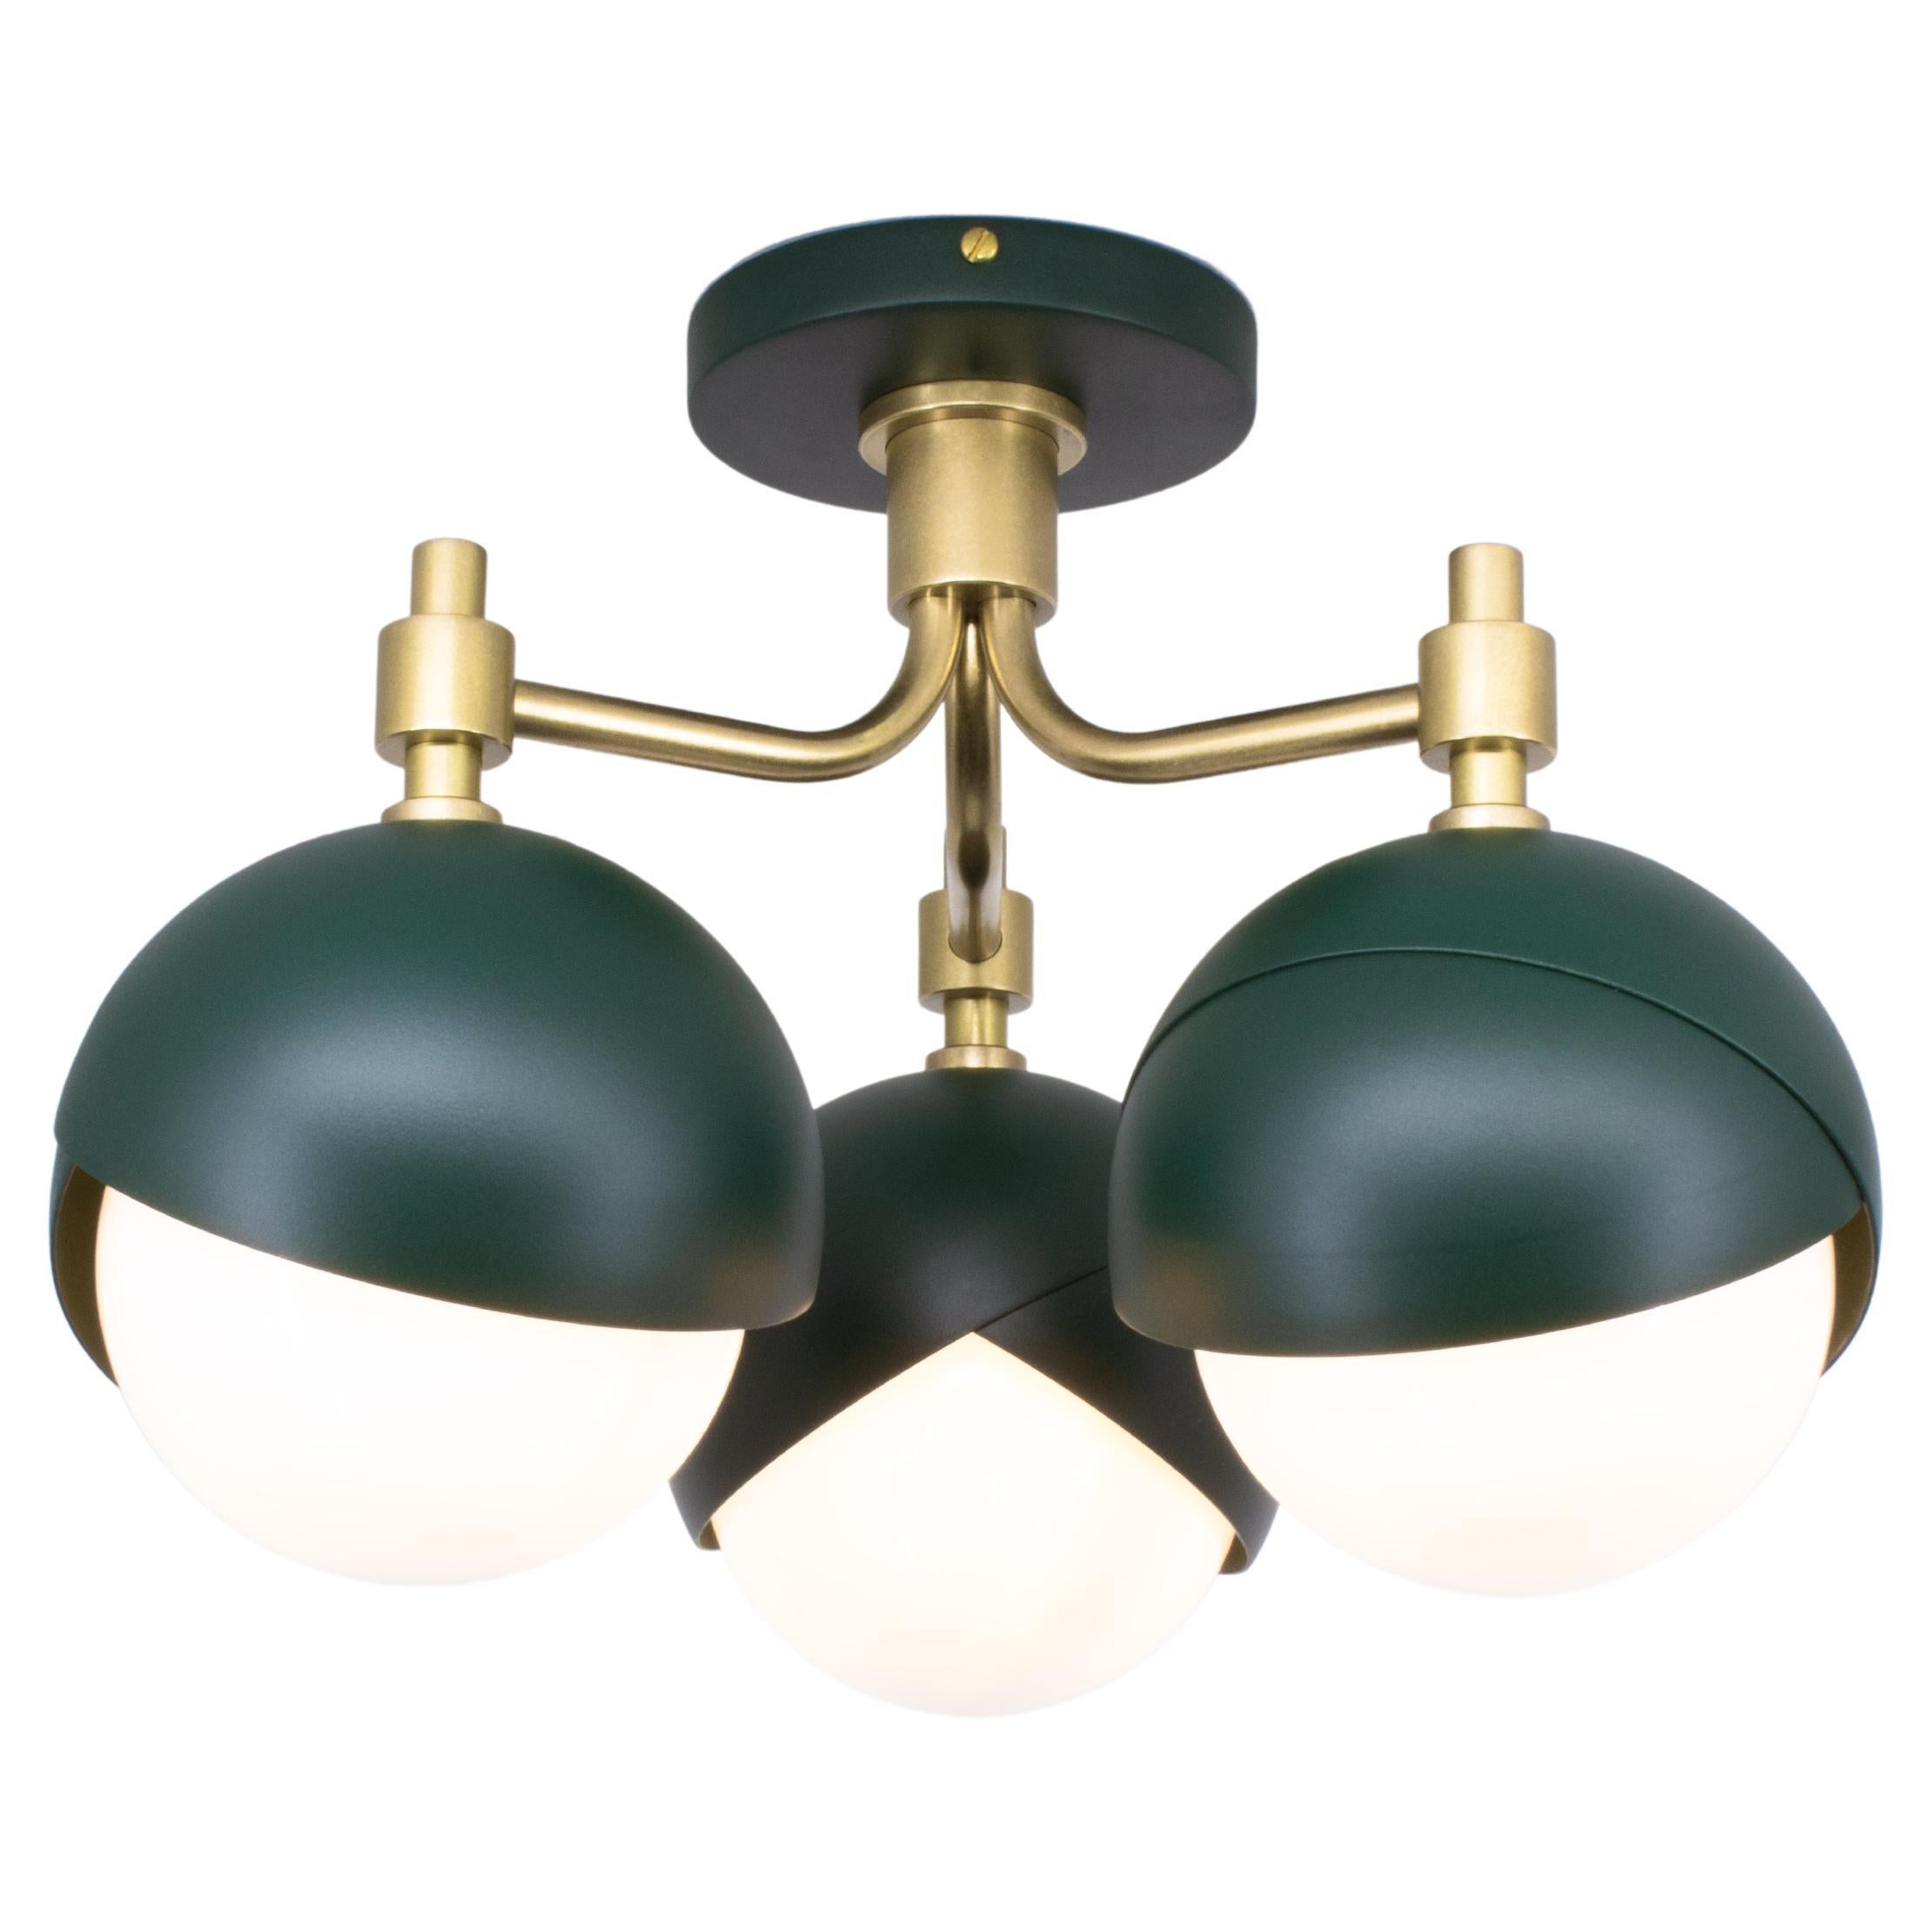 Benedict Three Light Lantern in Matte Green Powder Coat and Burnished Brass For Sale